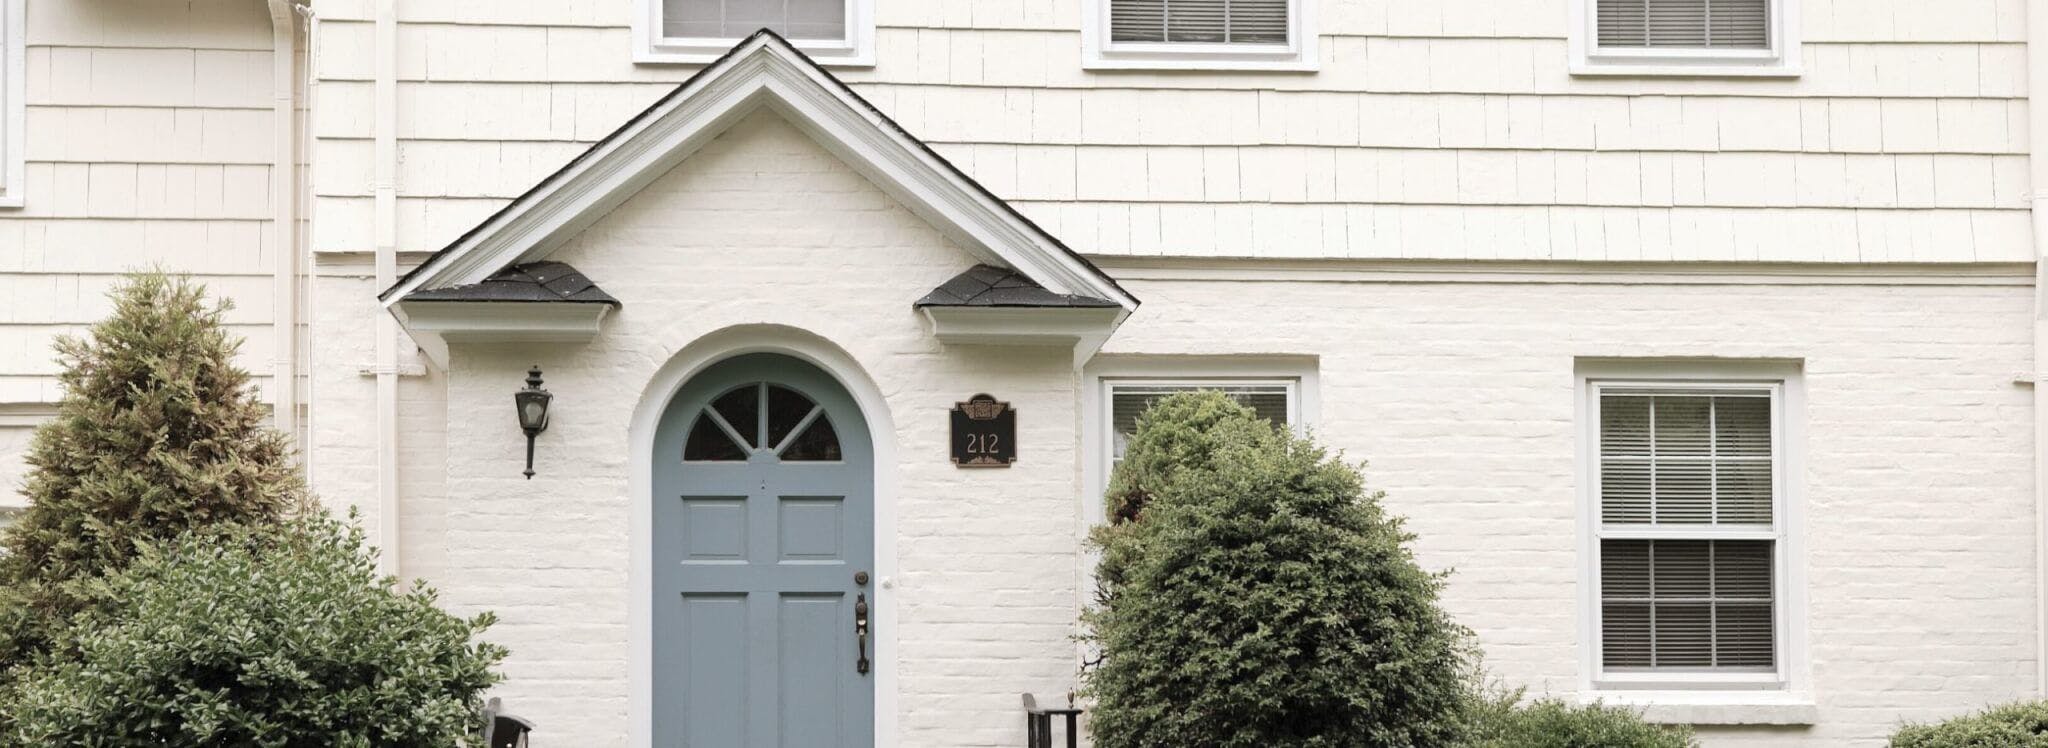 white home with blue front door